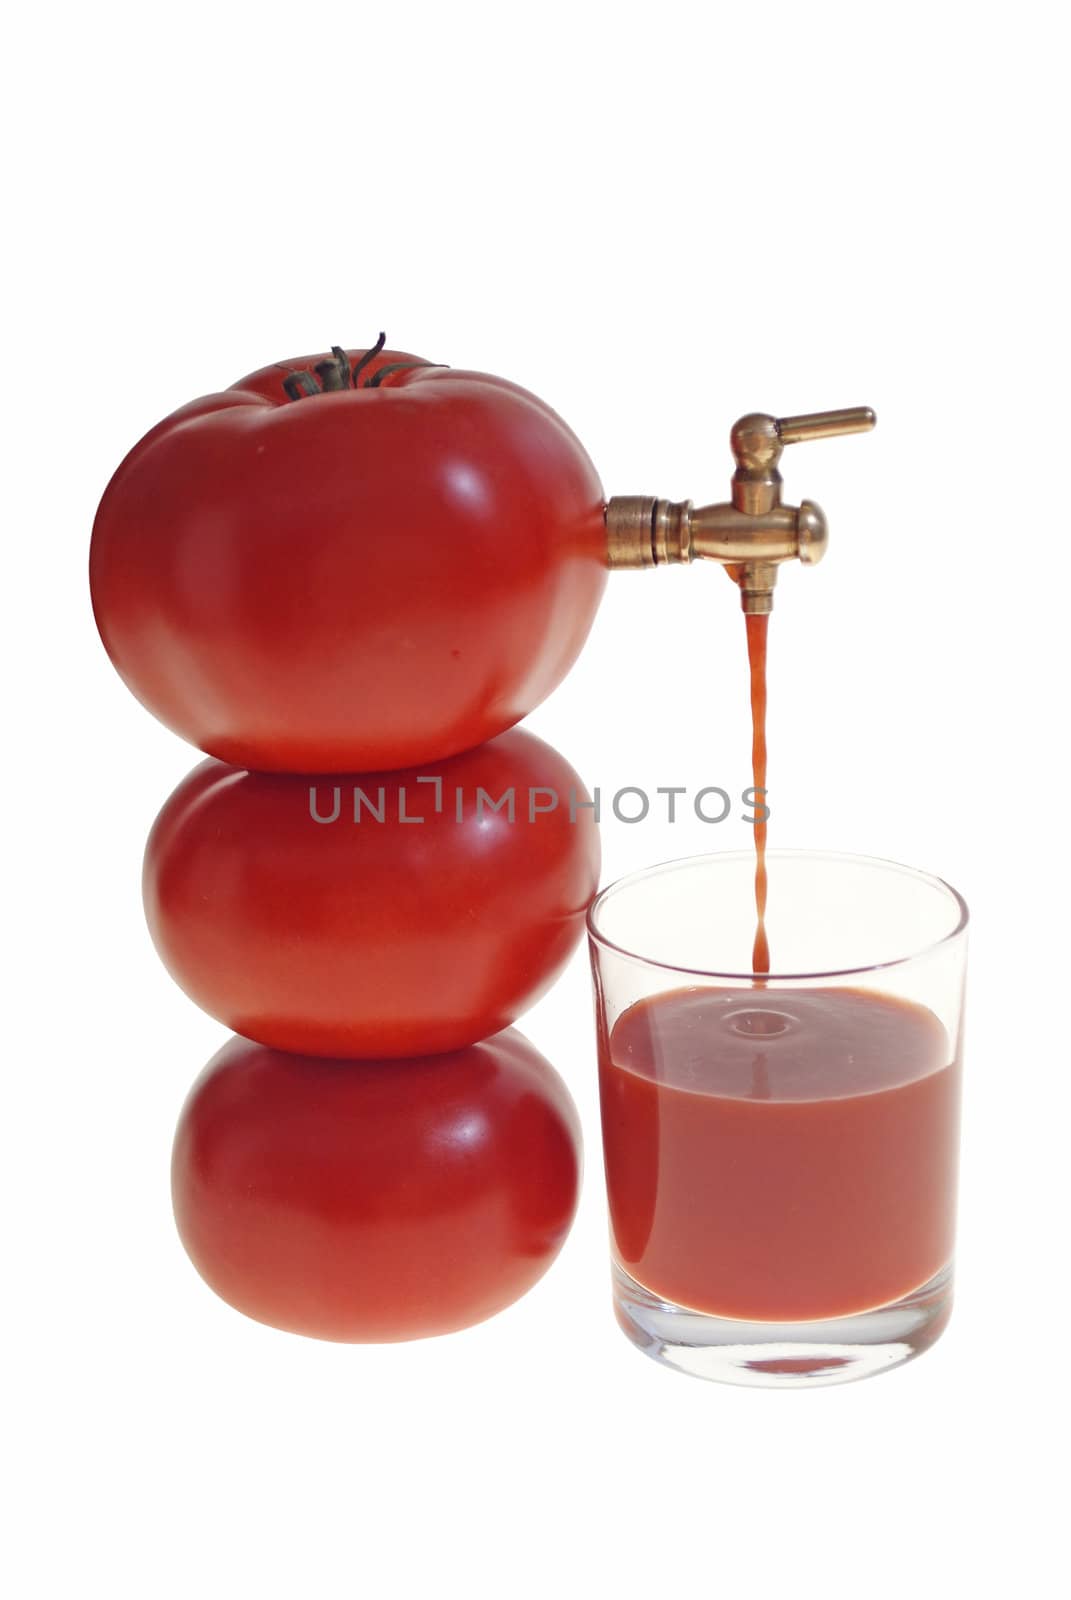 juice flowing from tomato to glass isolated on white background